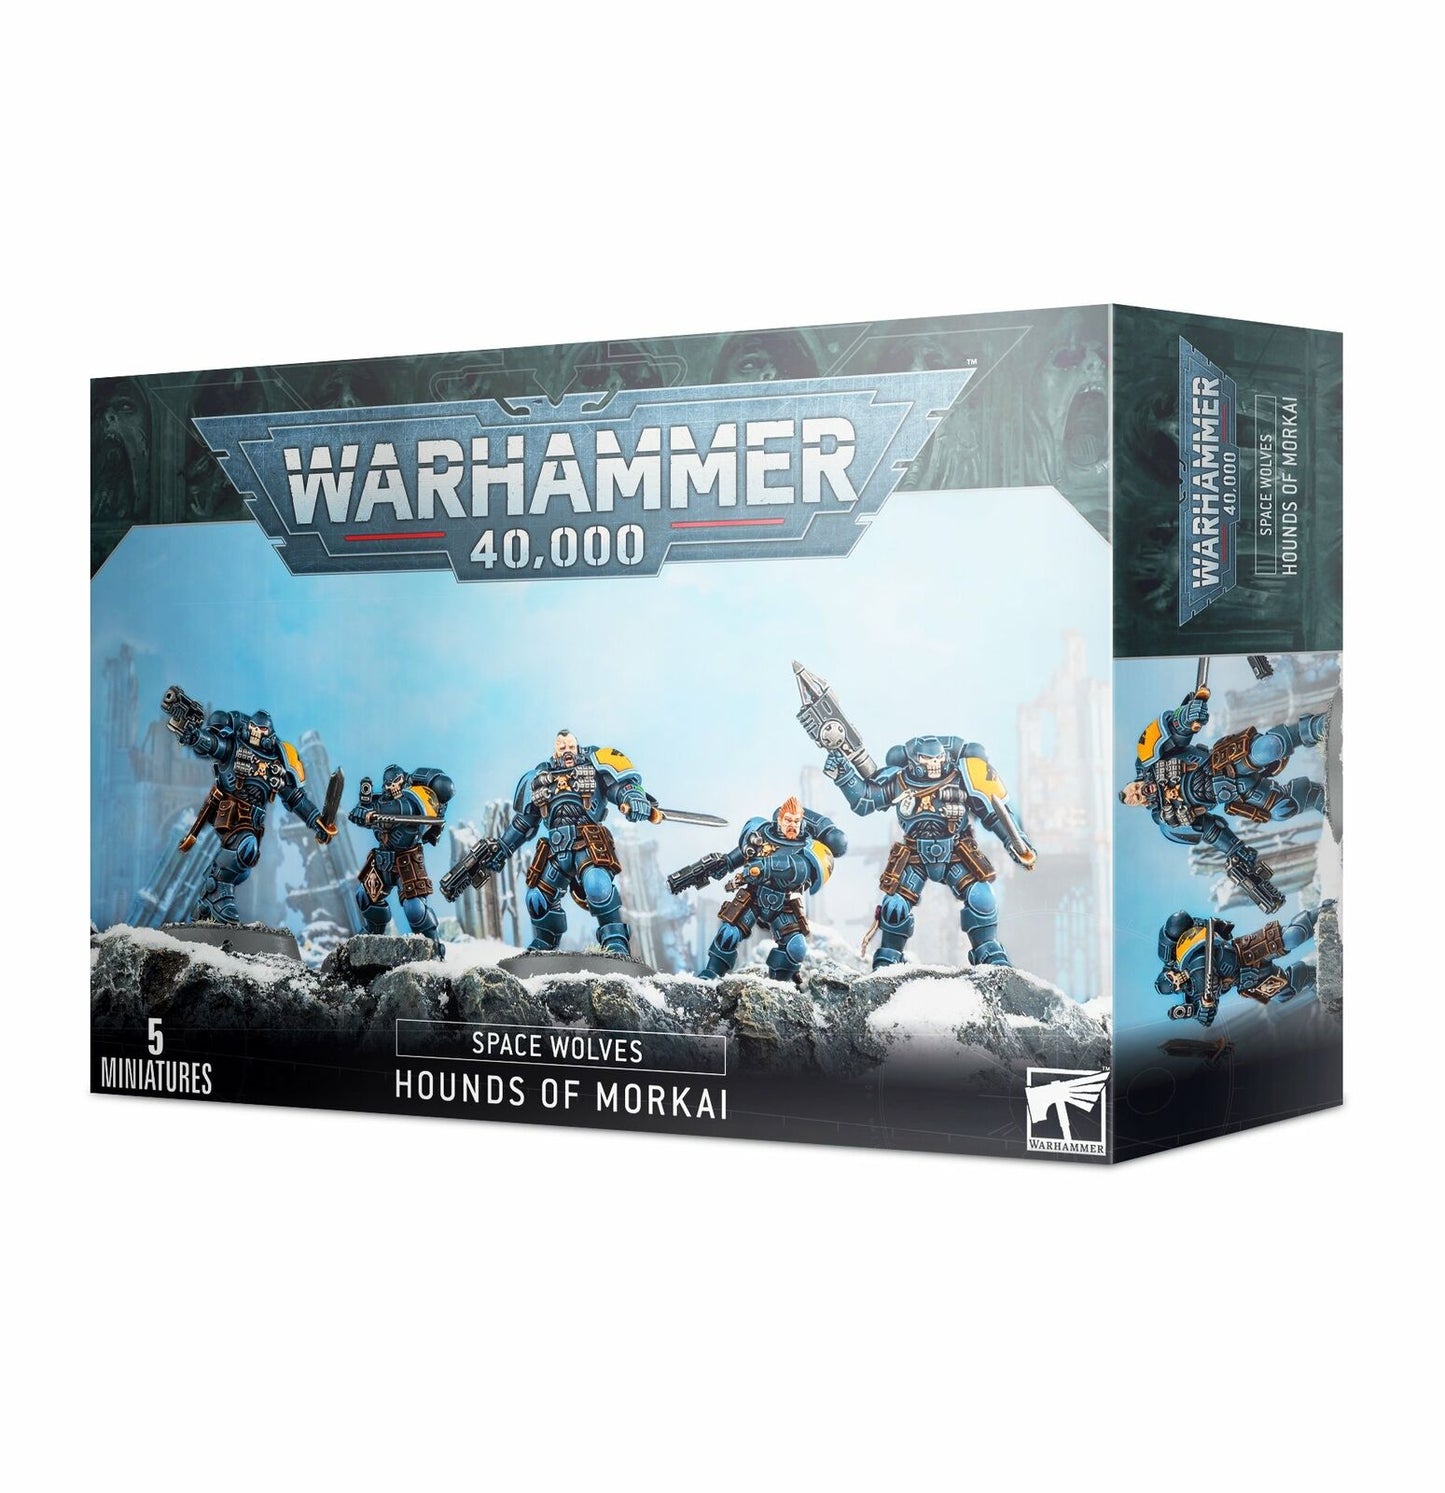 Discount Space Wolves Hounds of Morkai - West Coast Games